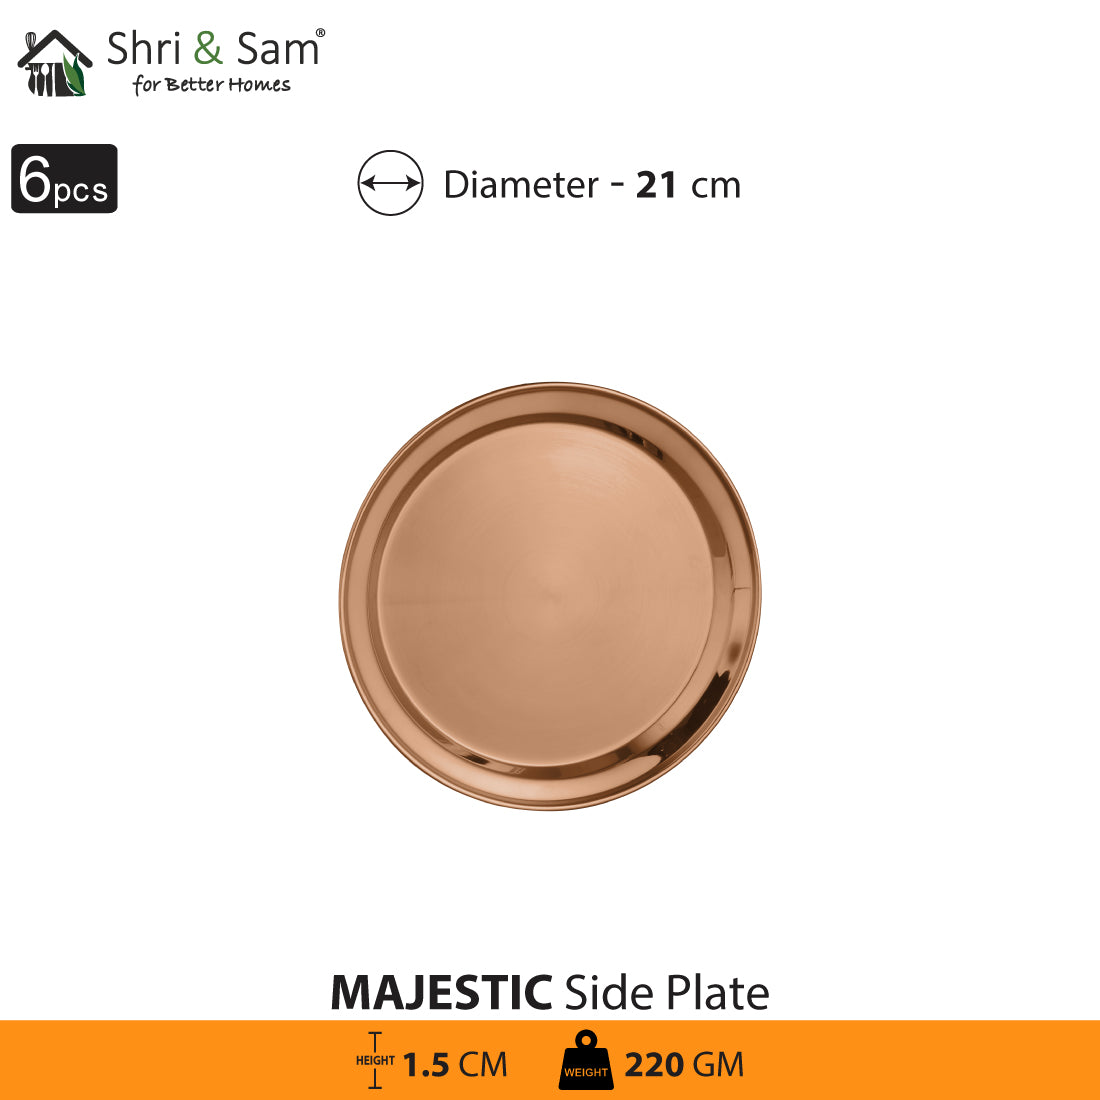 Stainless Steel 6 PCS Side Plate with Rose Gold PVD Coating Majestic